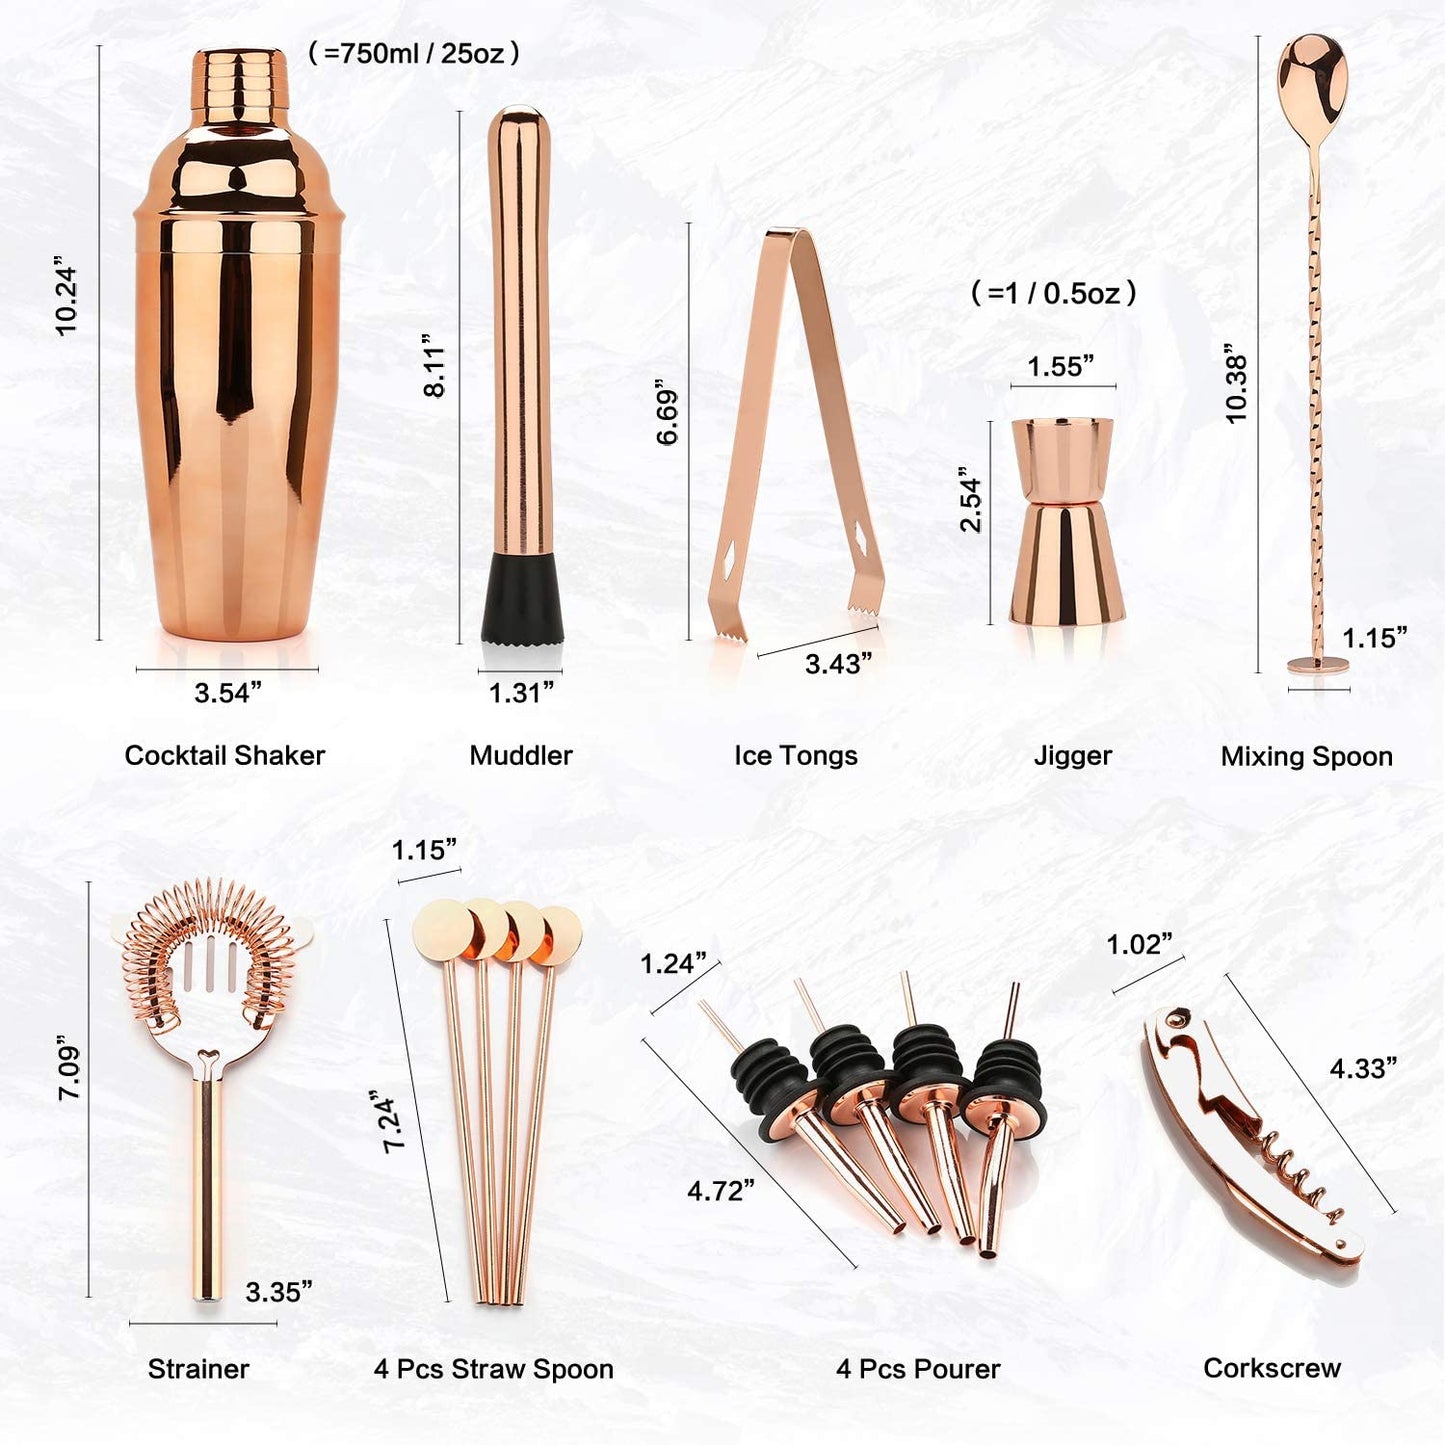 Cocktail Shaker Making Set,16pcs Bartender Kit for Mixer Wine Martini, Stainless Steel Bars Tool, Home Drink Party Accessories